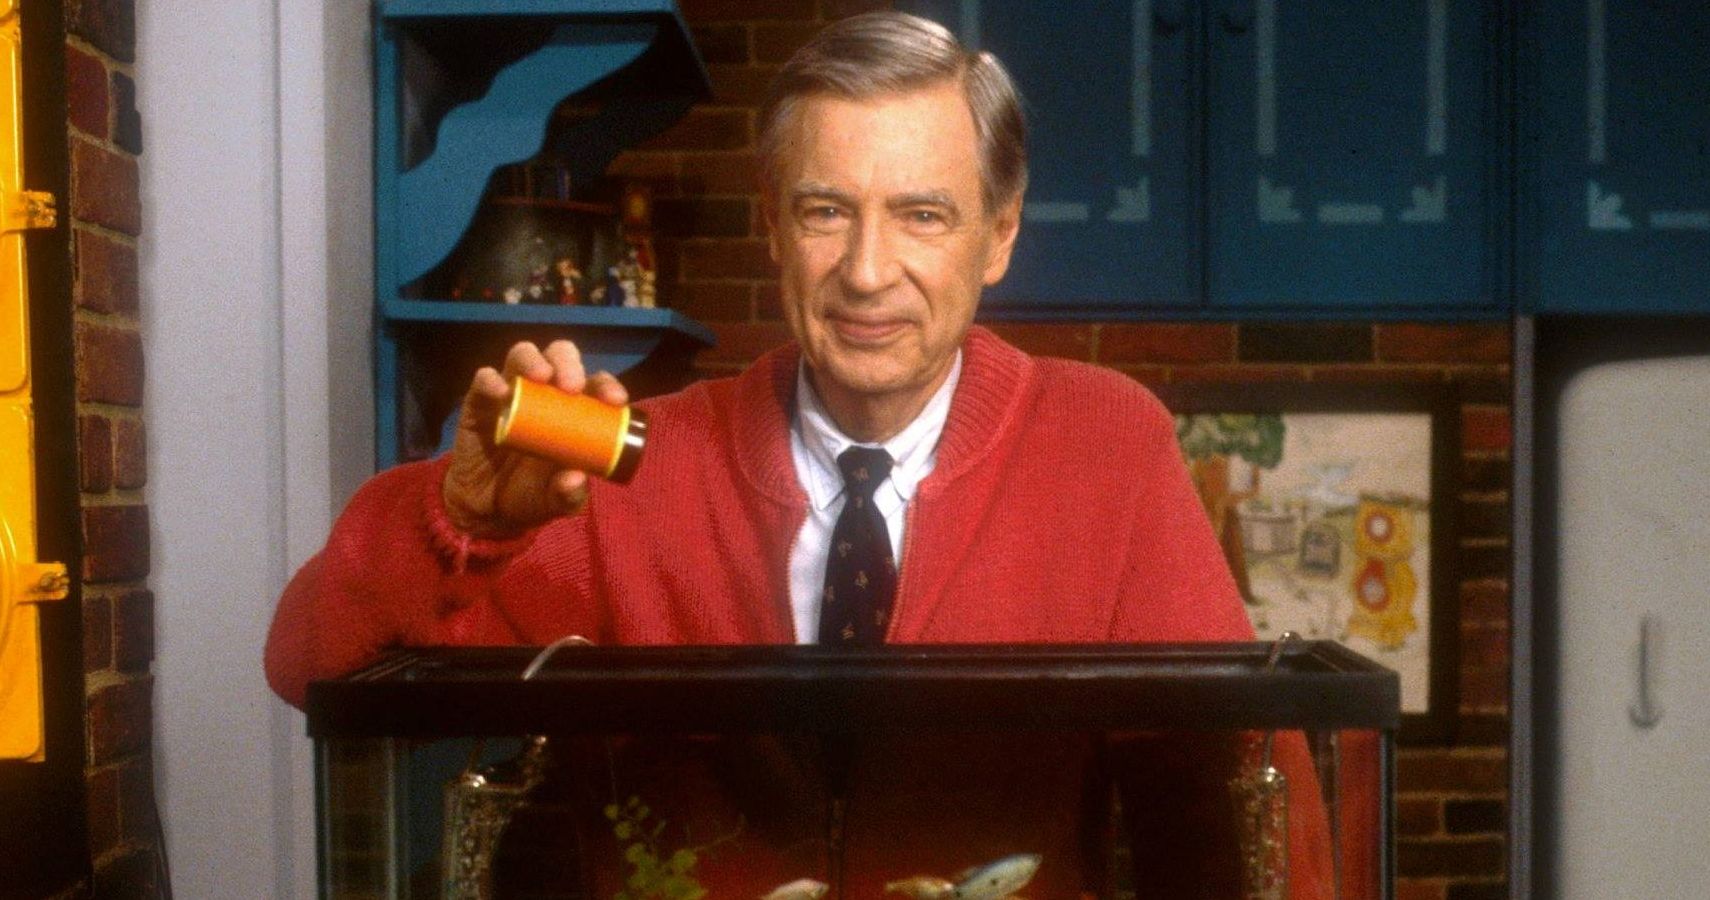 Mister Rogers Feeding Fish Featured